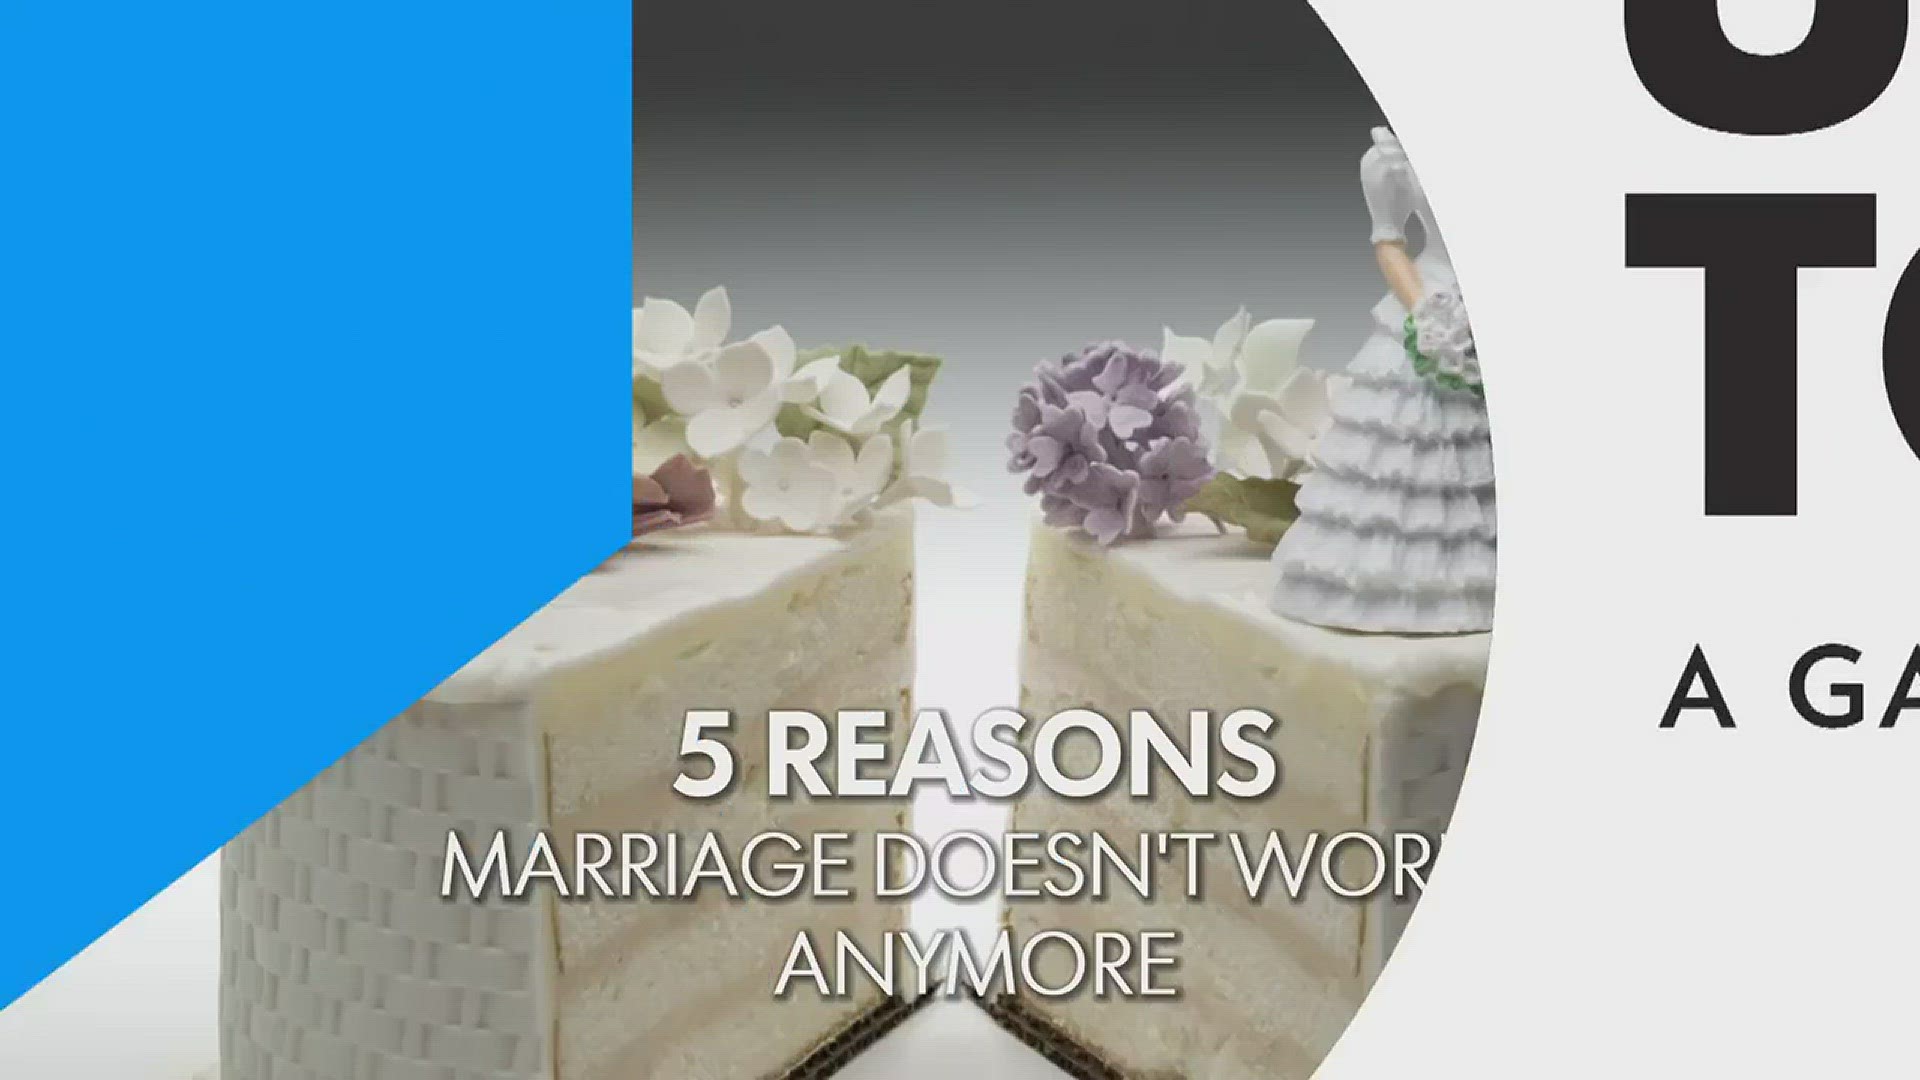 Sex columnist 5 reasons marriage doesnt work anymore 12news